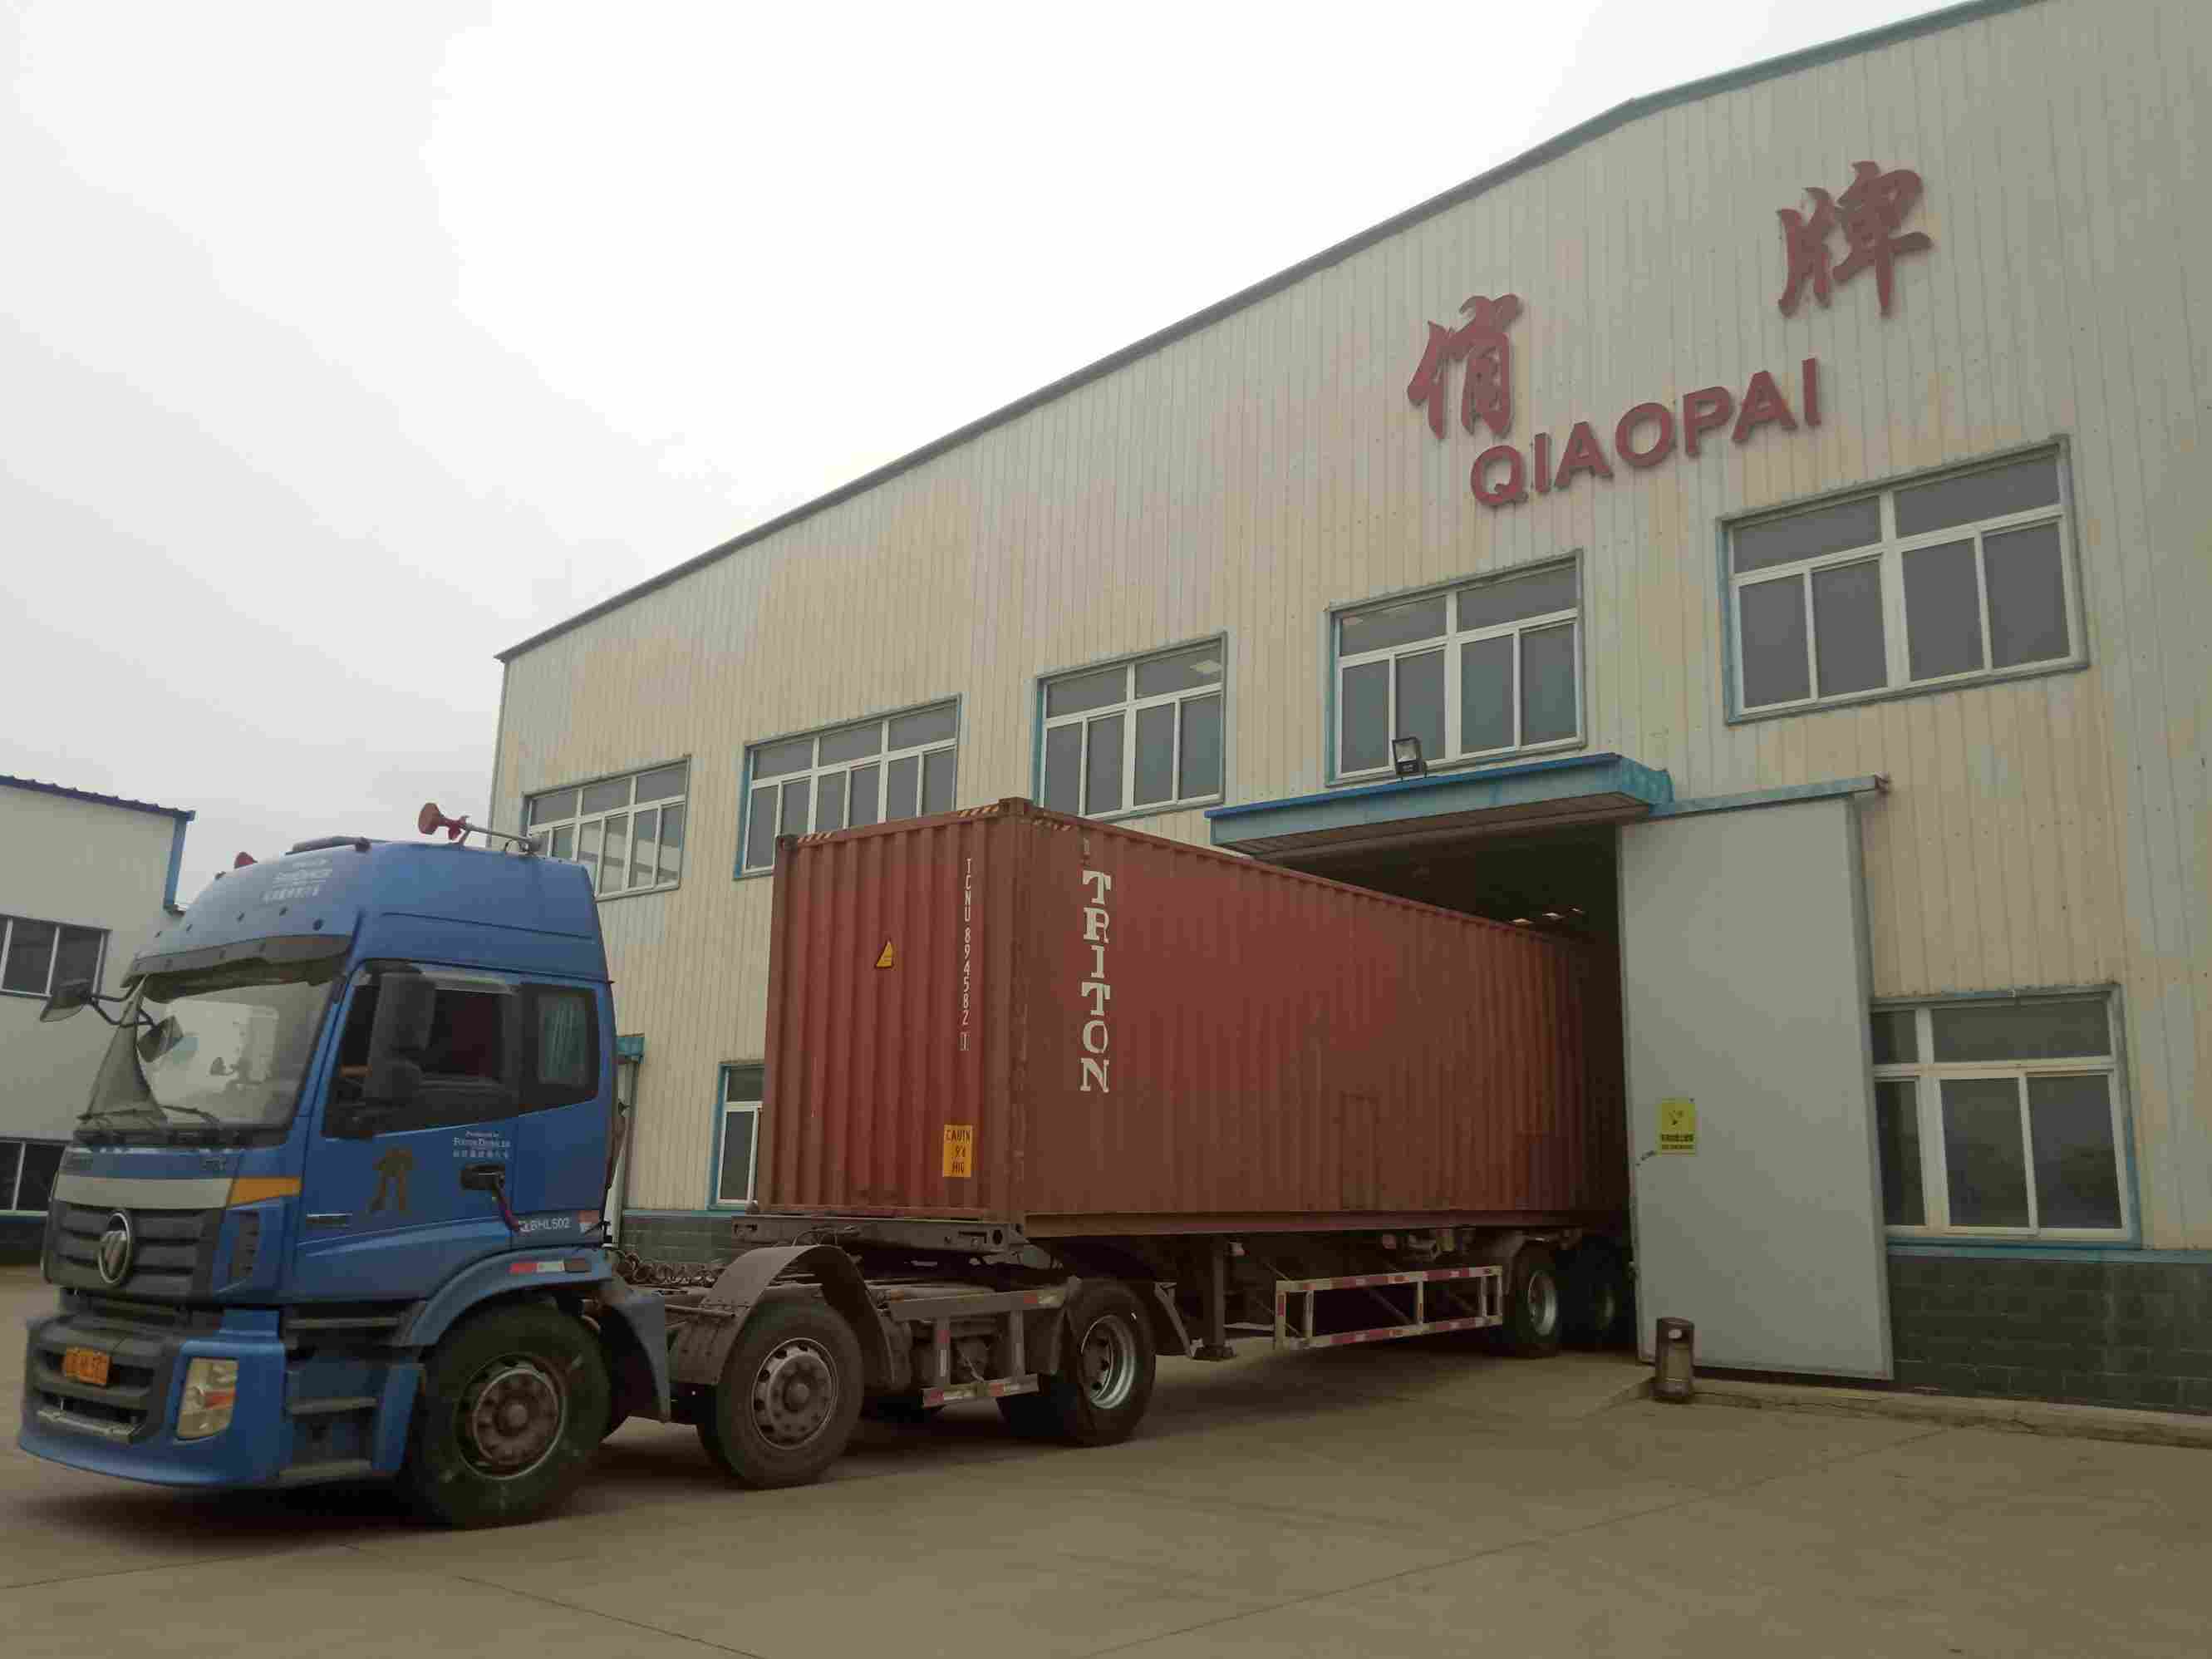 Liaoning Qiaopai Machineries Co., Ltd. exports sunflower seed dehulling equipment TFKH-1200 to North America.